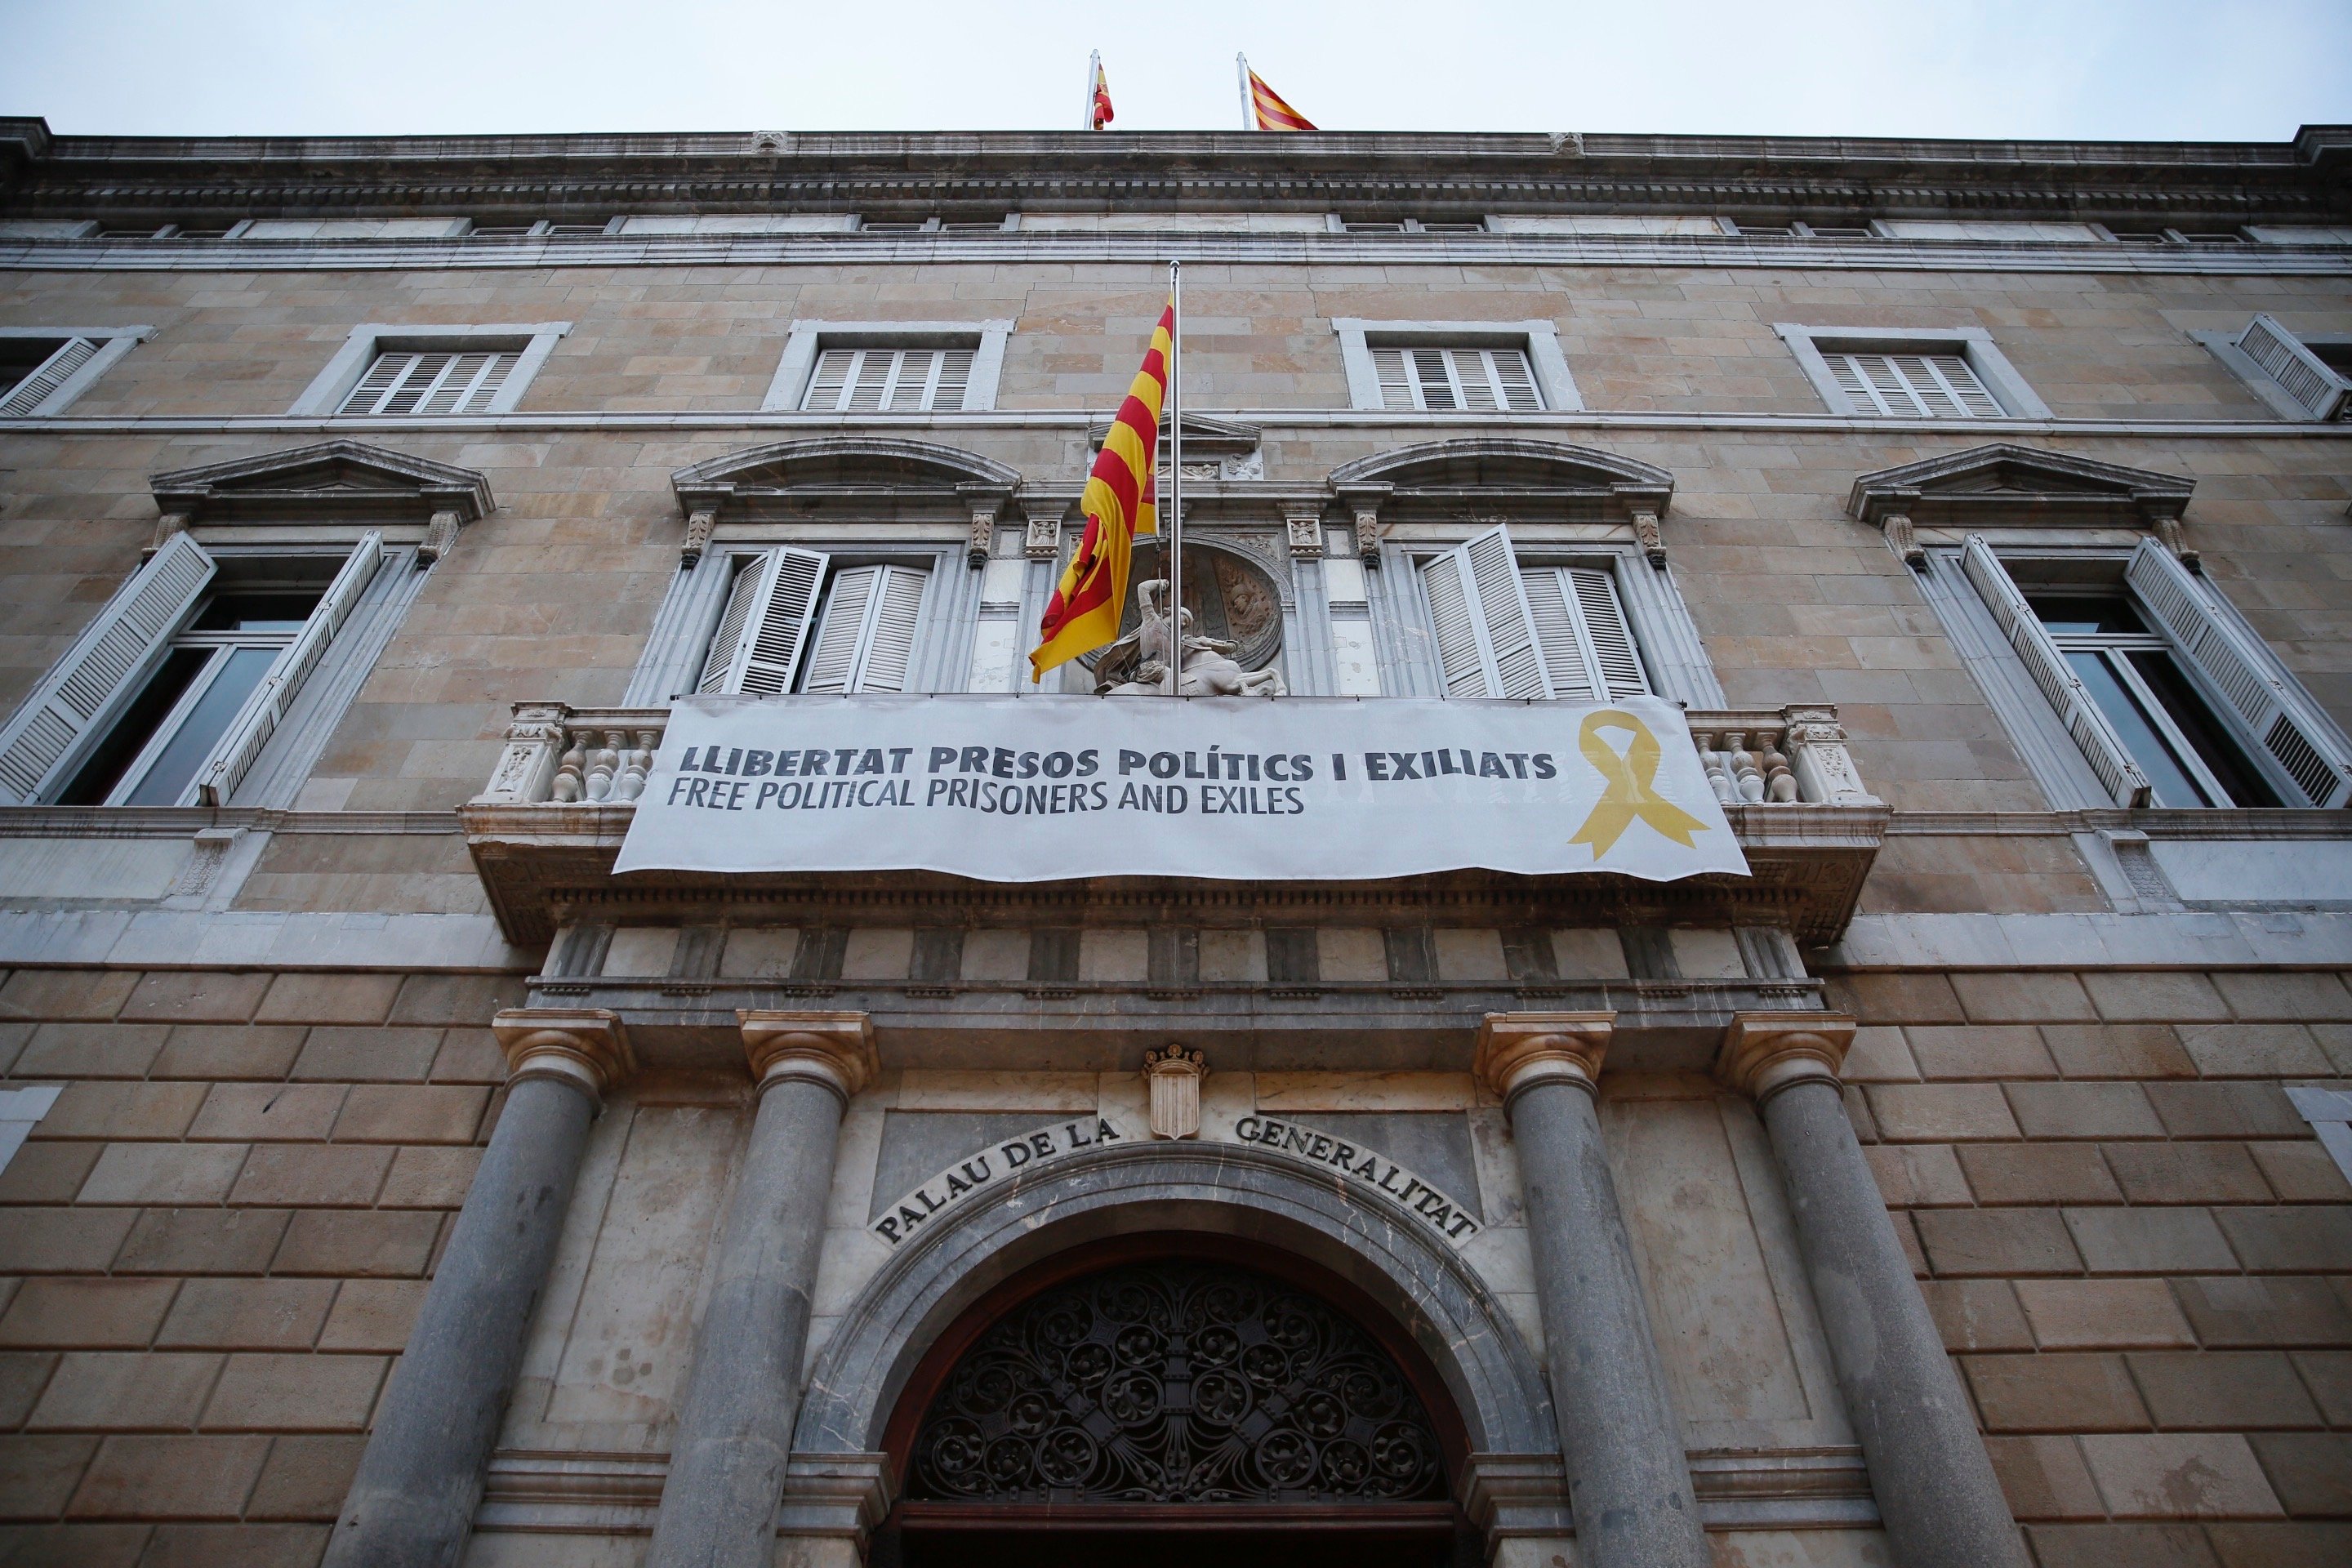 Catalan president Torra disobeys Election Board order to remove yellow loops